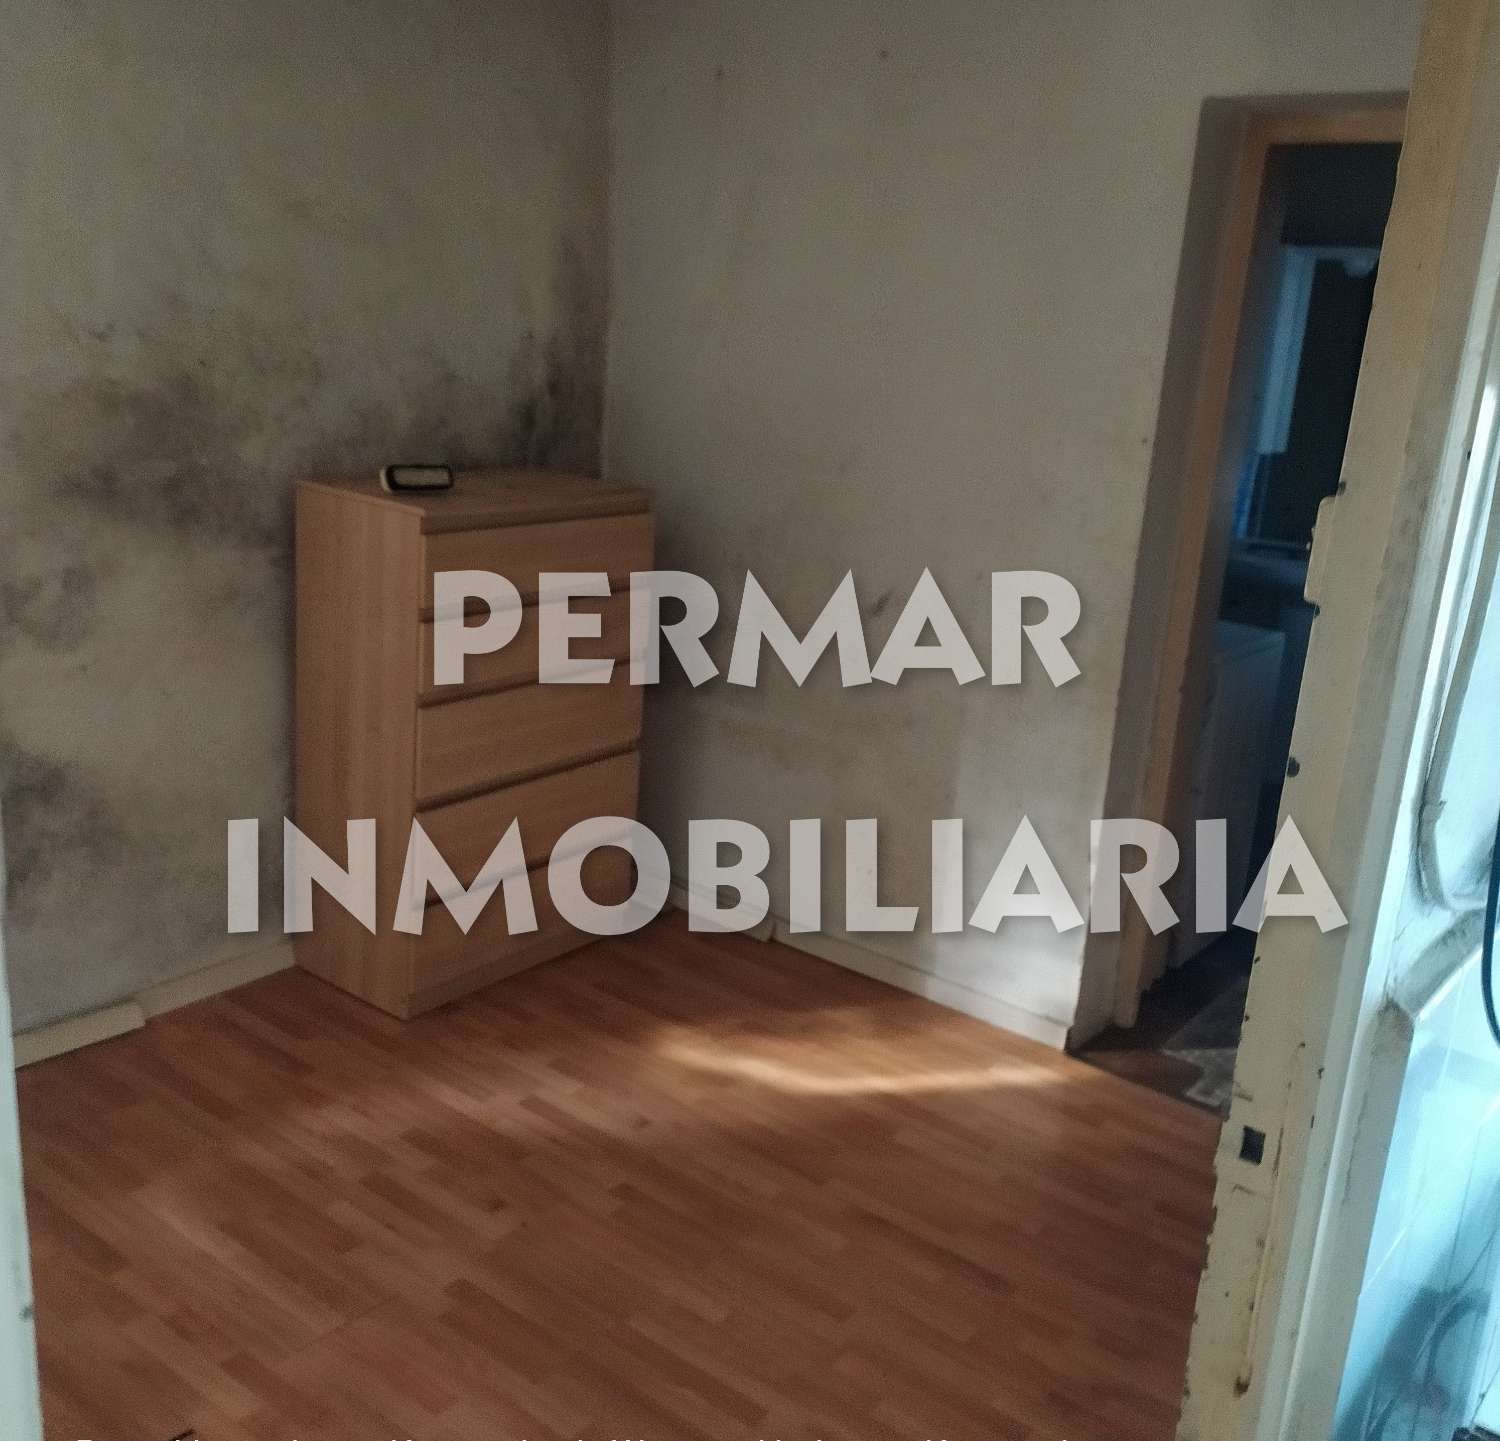 House for sale in Castro-Urdiales